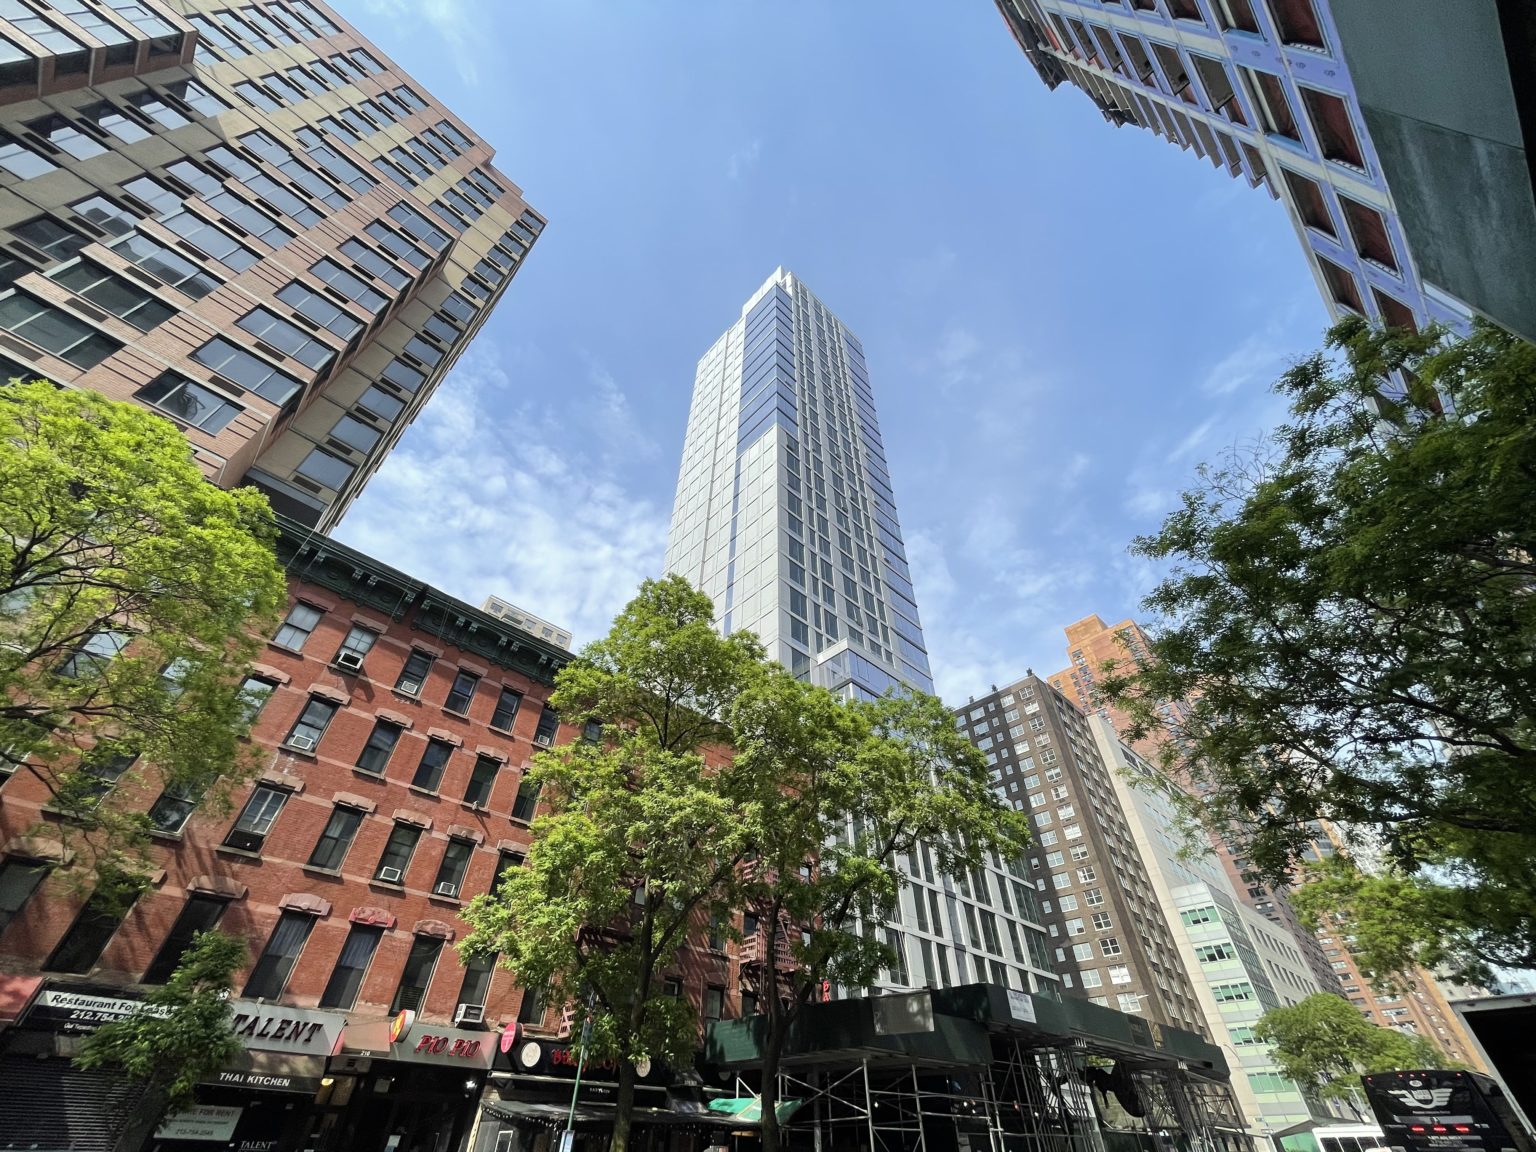 Eastlight Nears Completion at 200 East 34th Street in Kips Bay